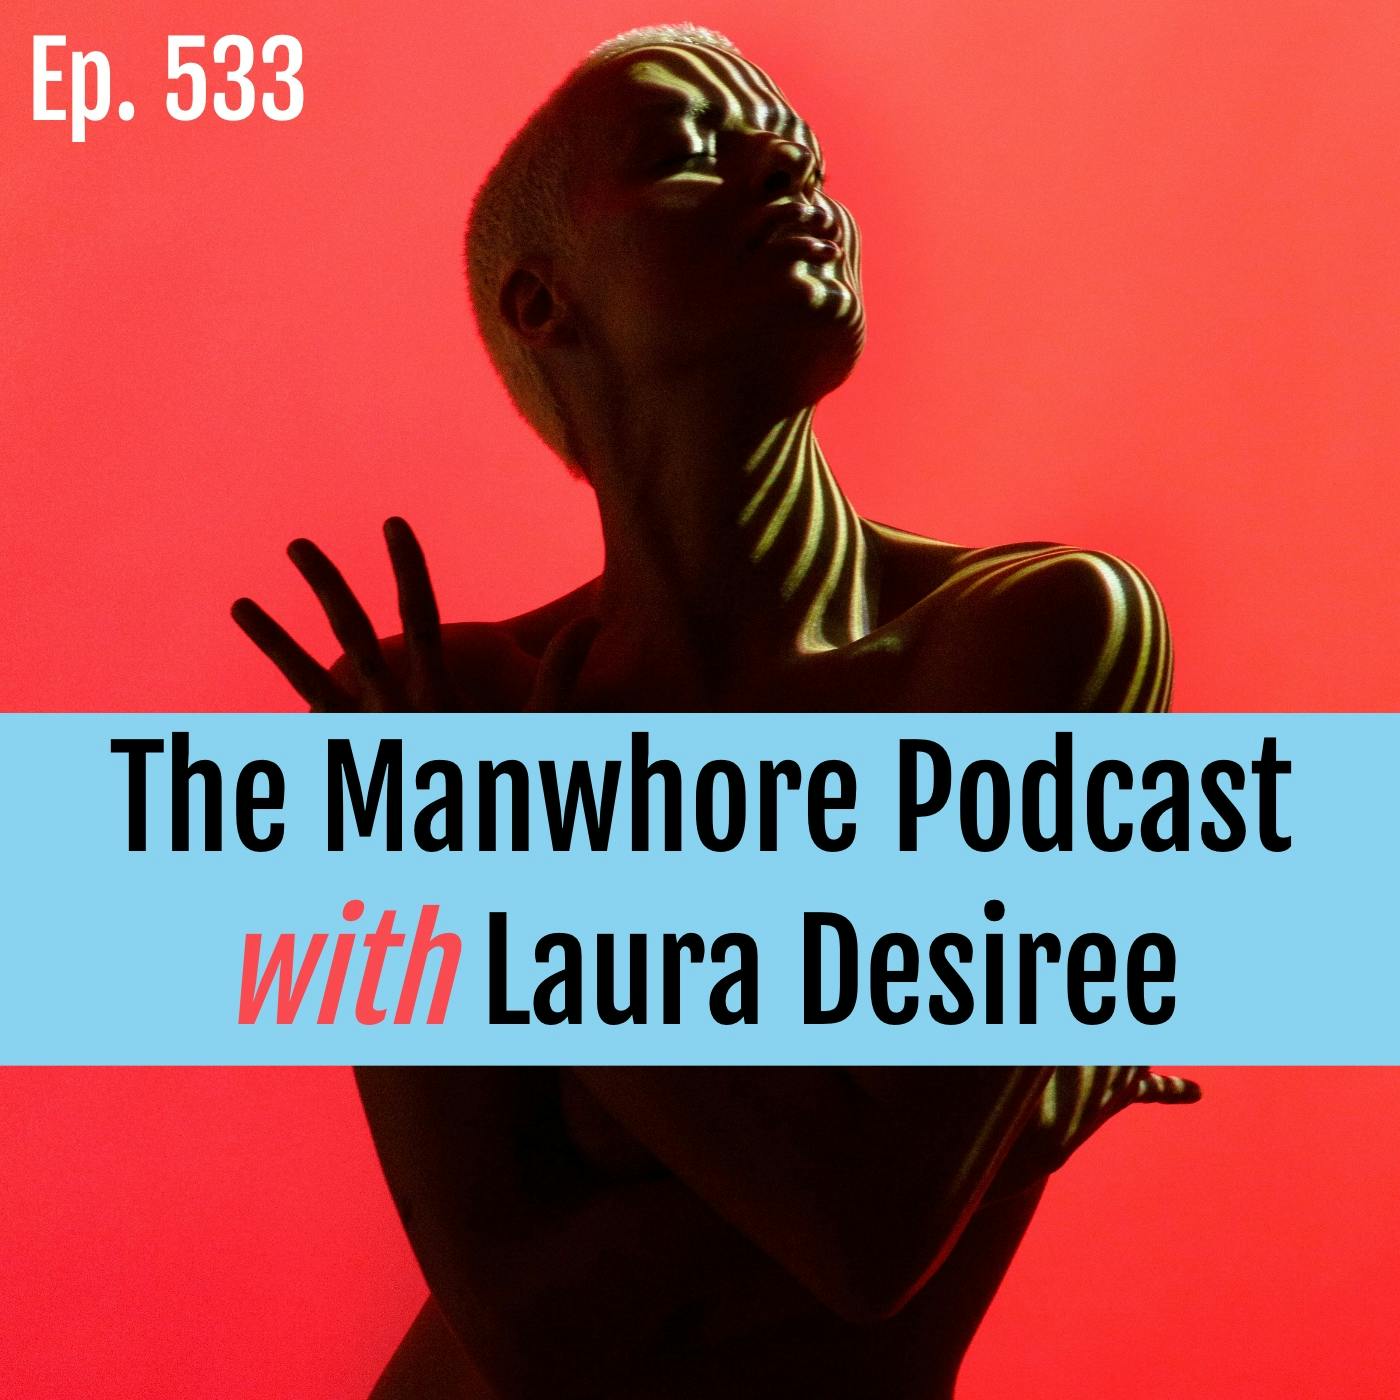 Ep. 533: 'Penetrative Art' and Wounded Vore Fantasies with Naked News anchor Laura Desiree